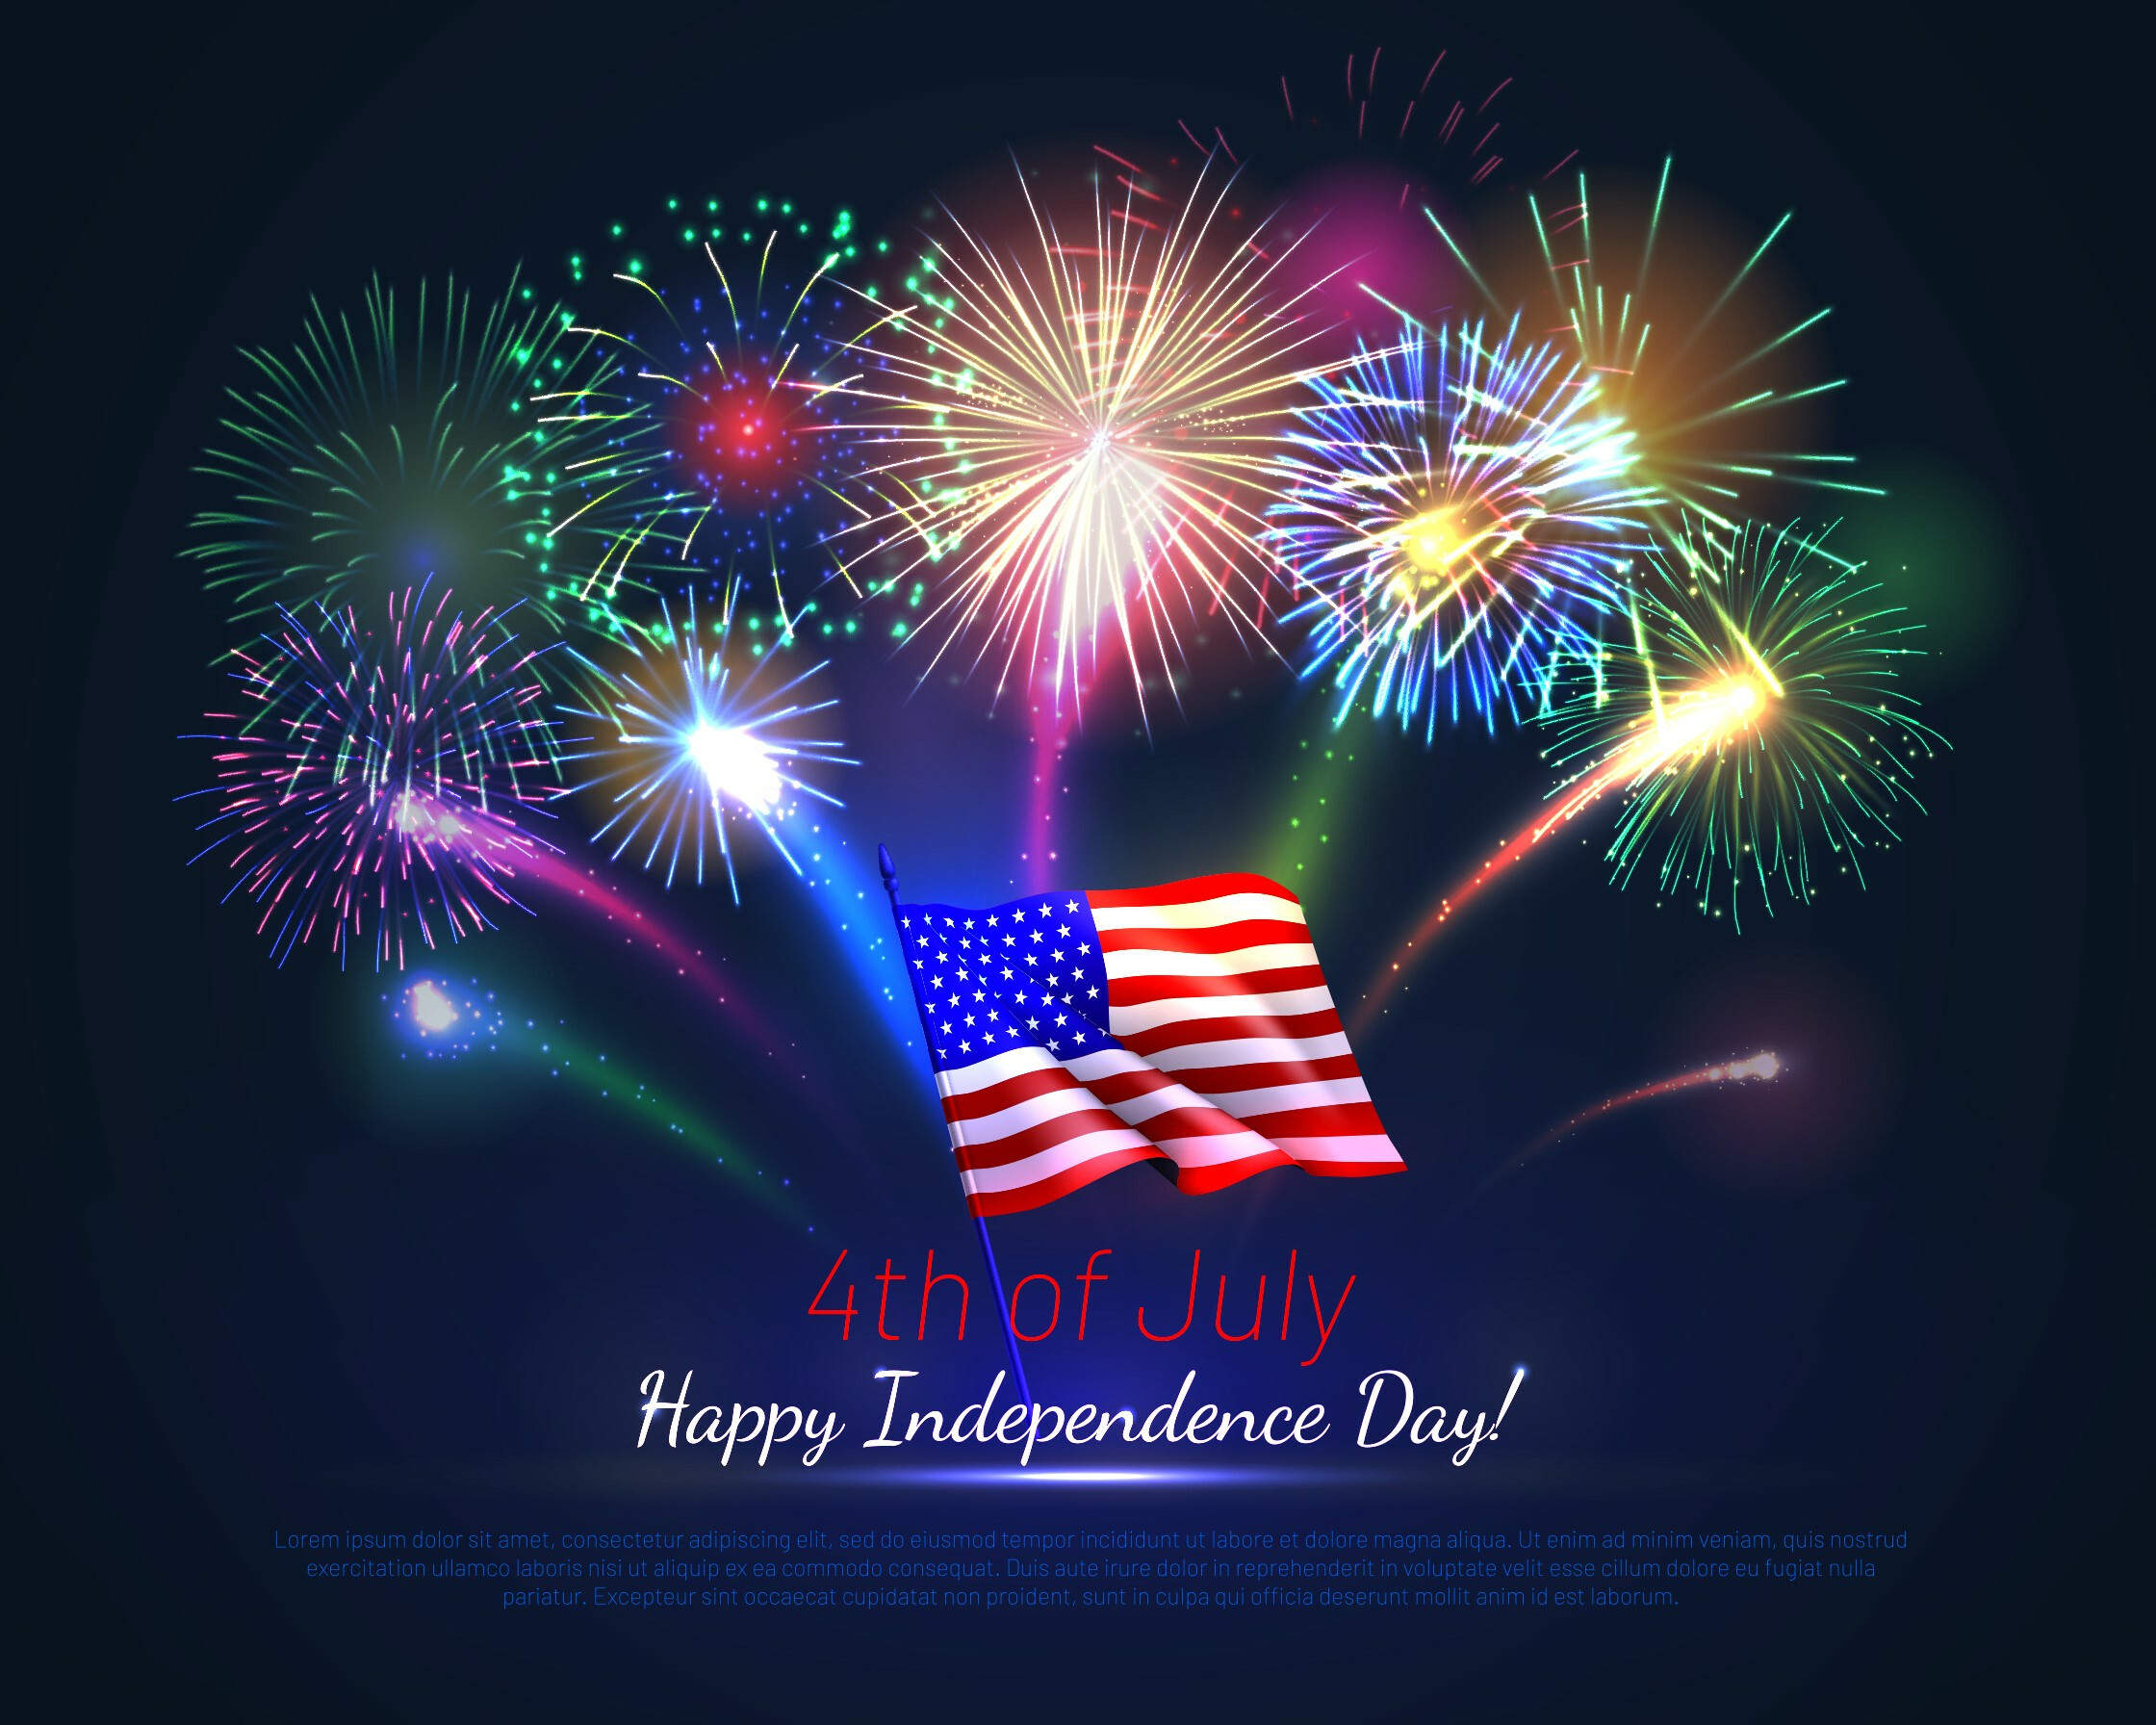 What Does Independence Day Mean to You?